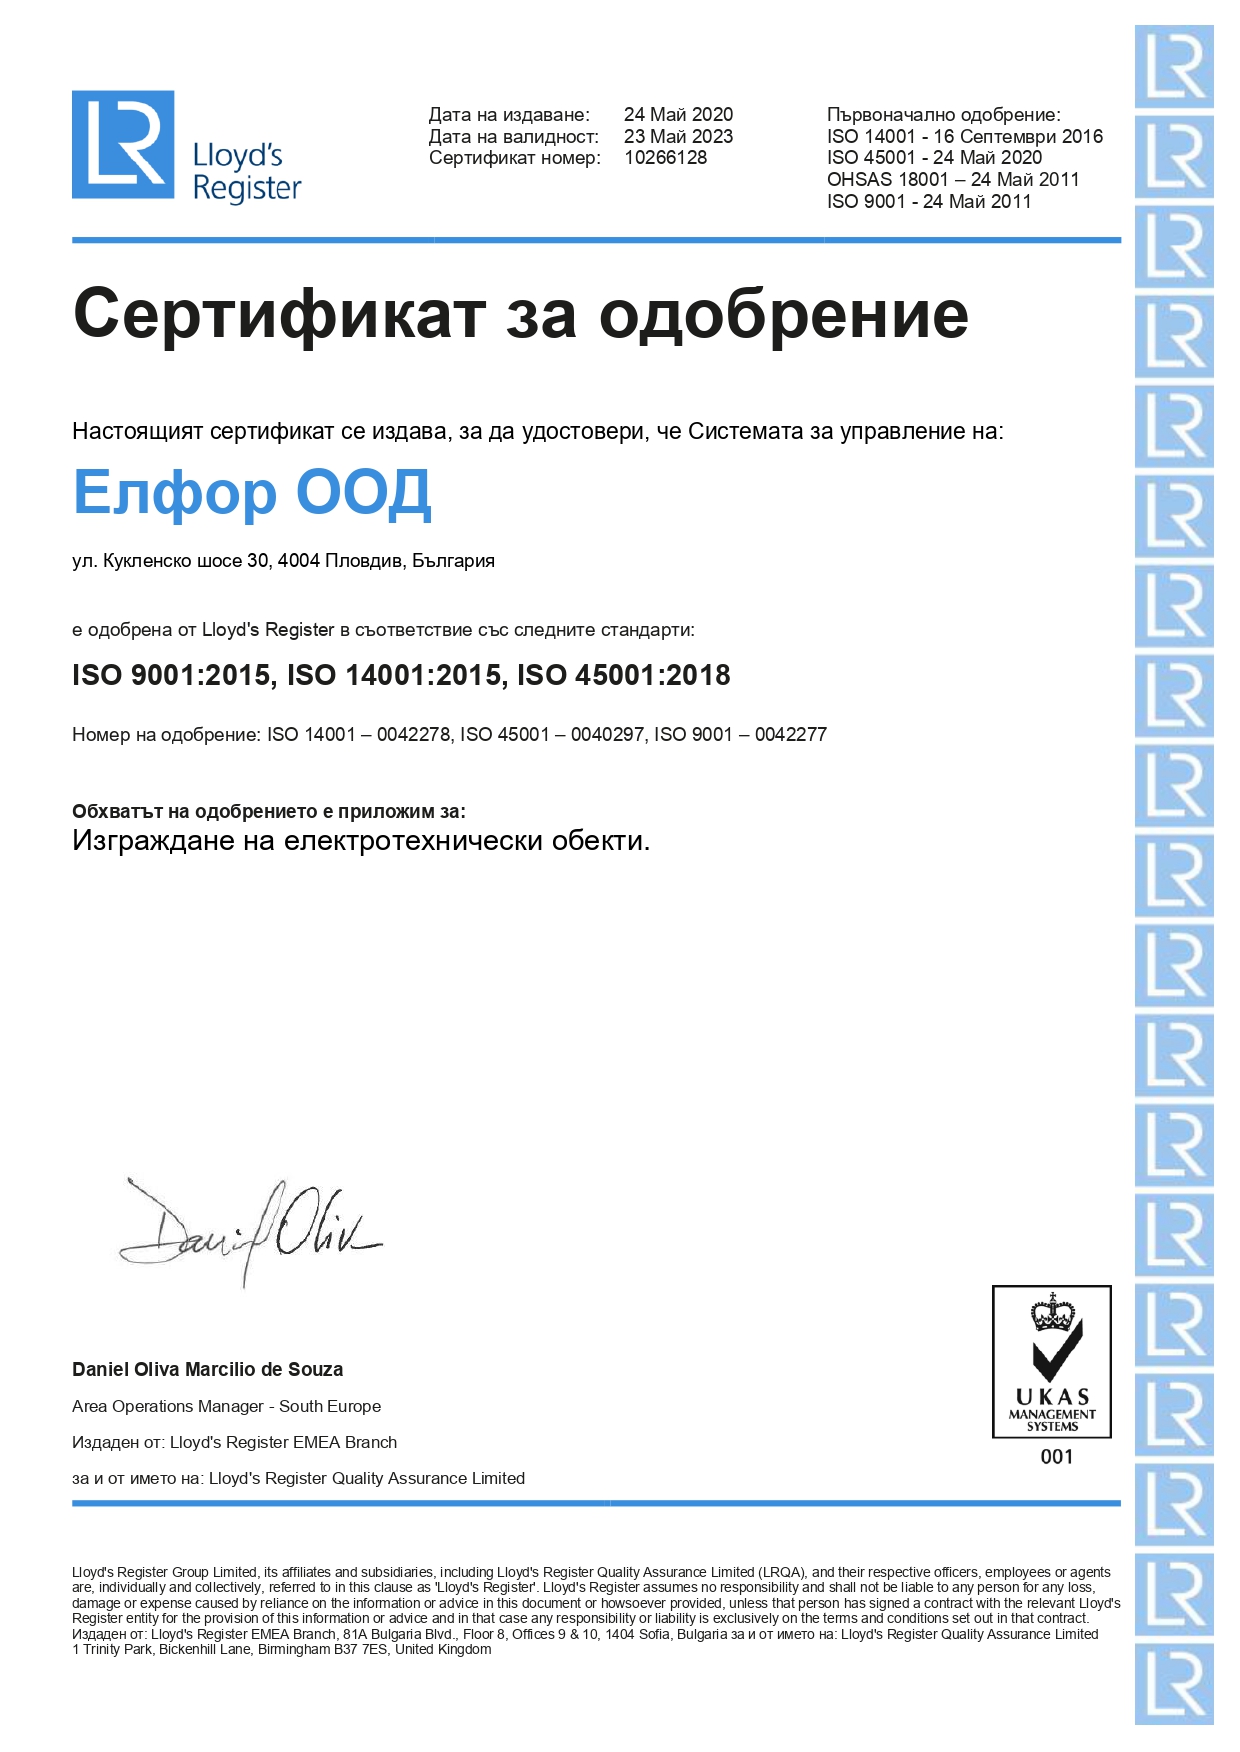 Certificate of Approval from Lloyd’s Register Approval Certificate for implementation of ISO 9001: 2015, ISO 14001: 2015, ISO 45001: 2018